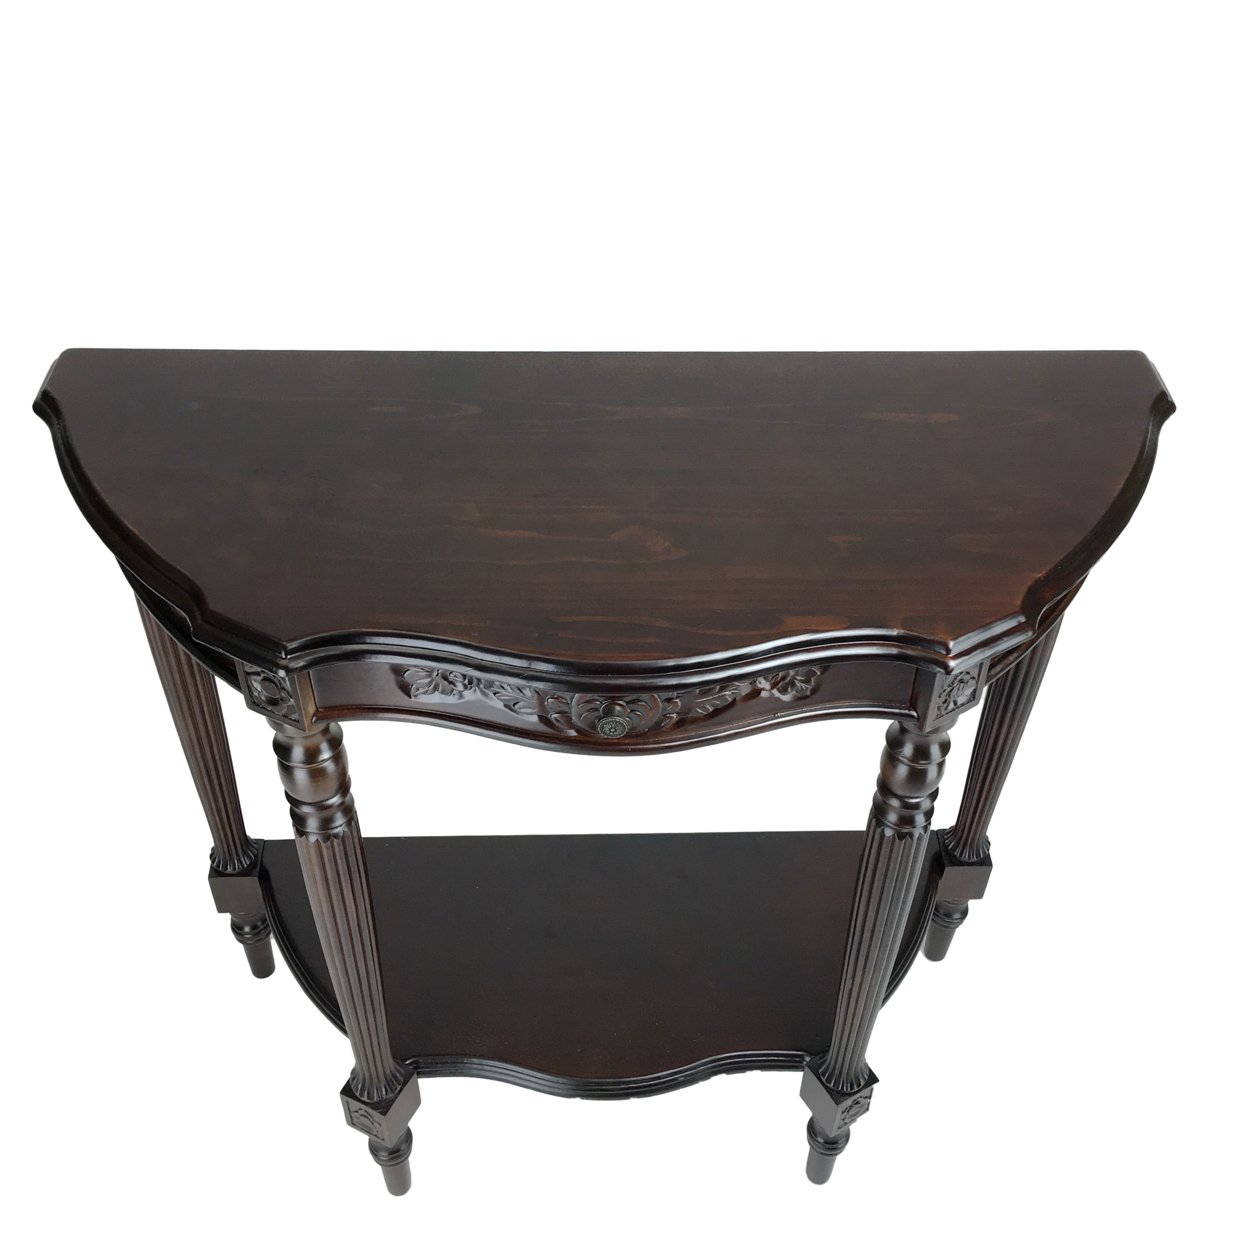 Half Crescent Moon Shape Engraved Wooden Console Table With 1 Drawer,Brown- Saltoro Sherpi